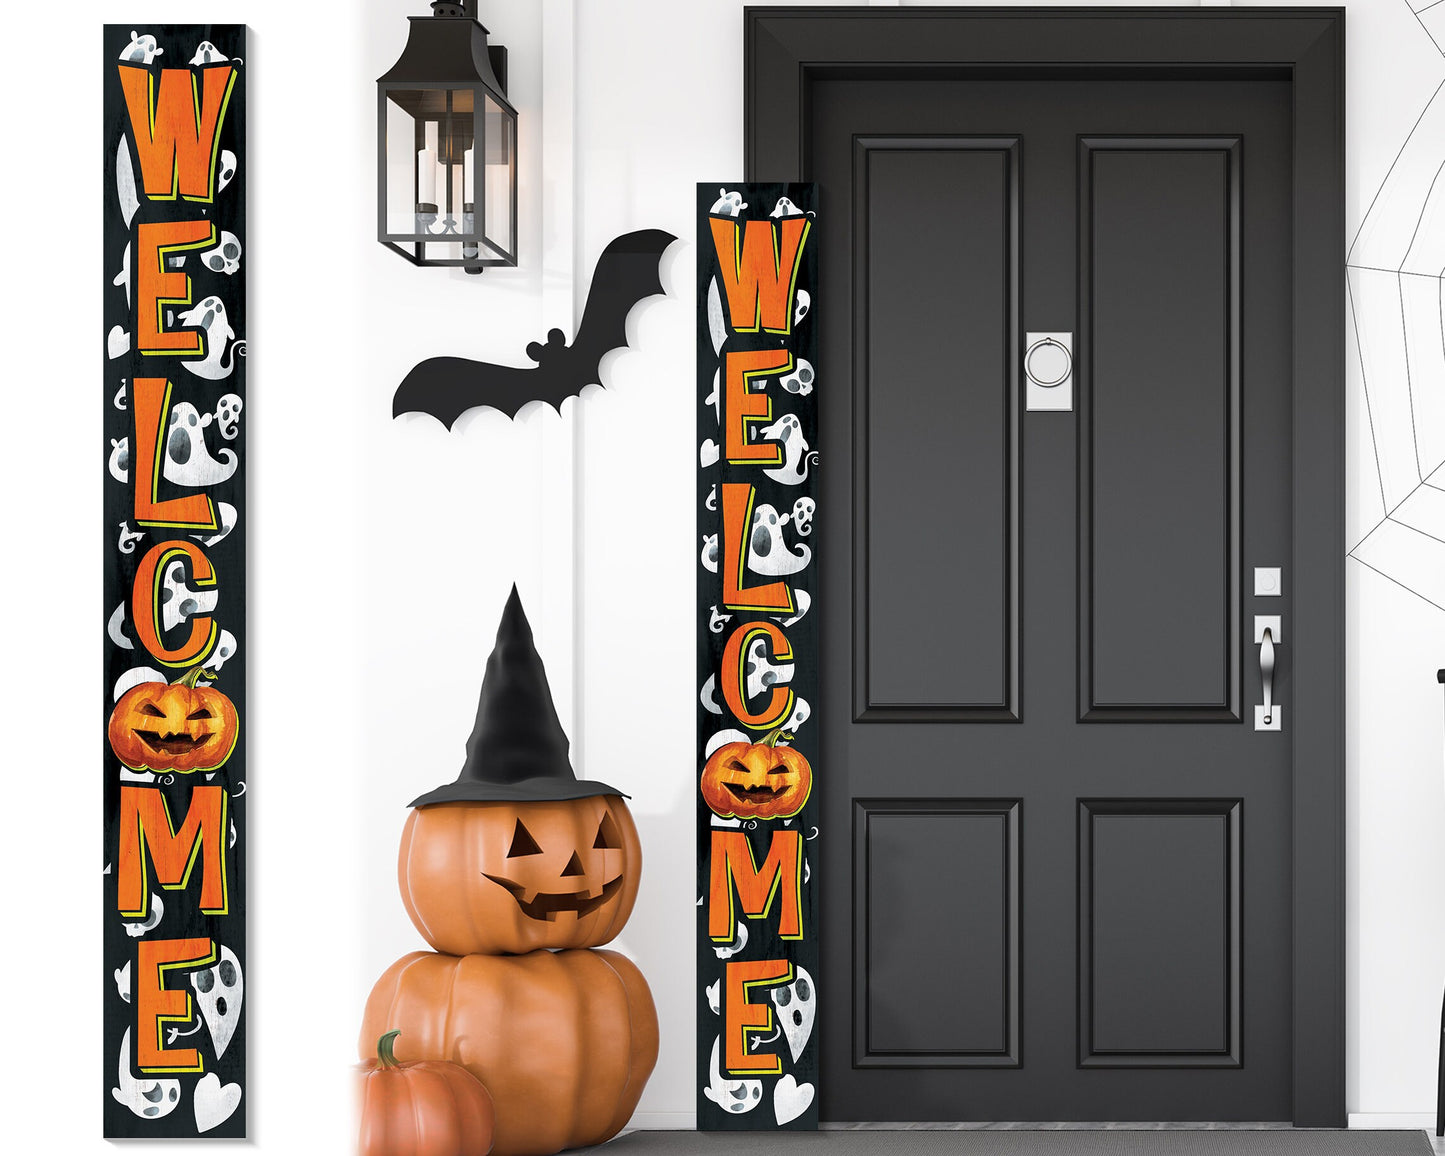 72-Inch Wooden Halloween Welcome Sign with Ghost Pattern and Jack O'Lantern - Spooky Front Door Decoration for Porch, Entryway